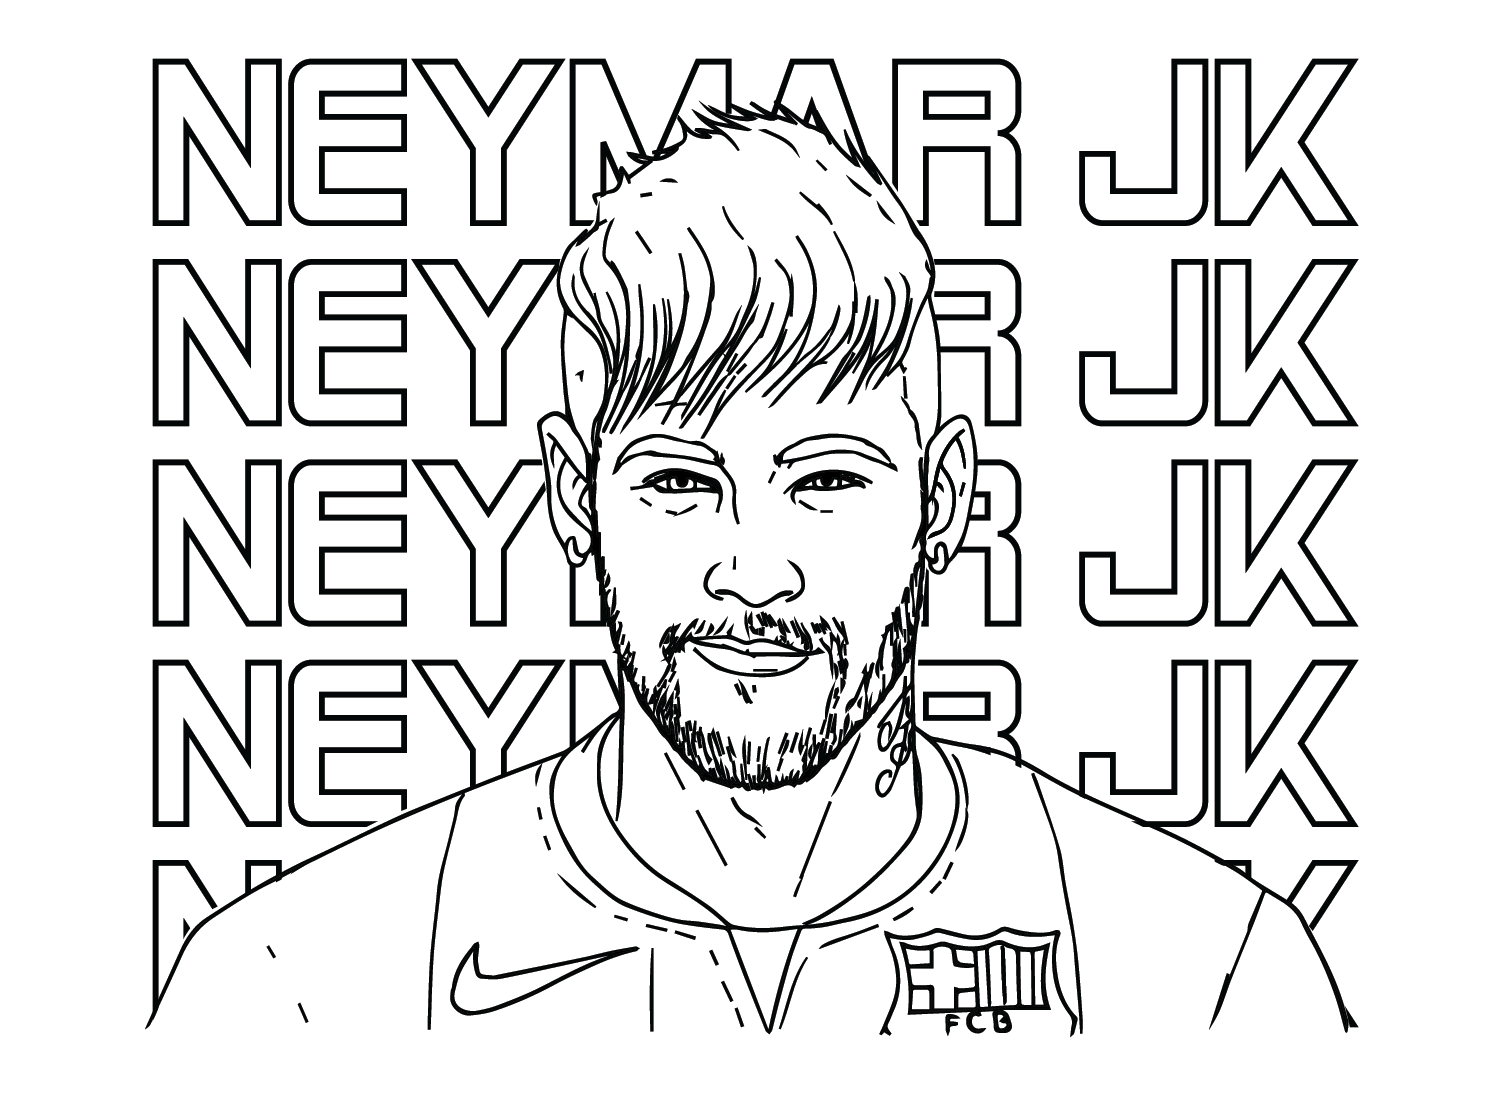 Neymar JK Coloring Page - Free Printable Coloring Pages